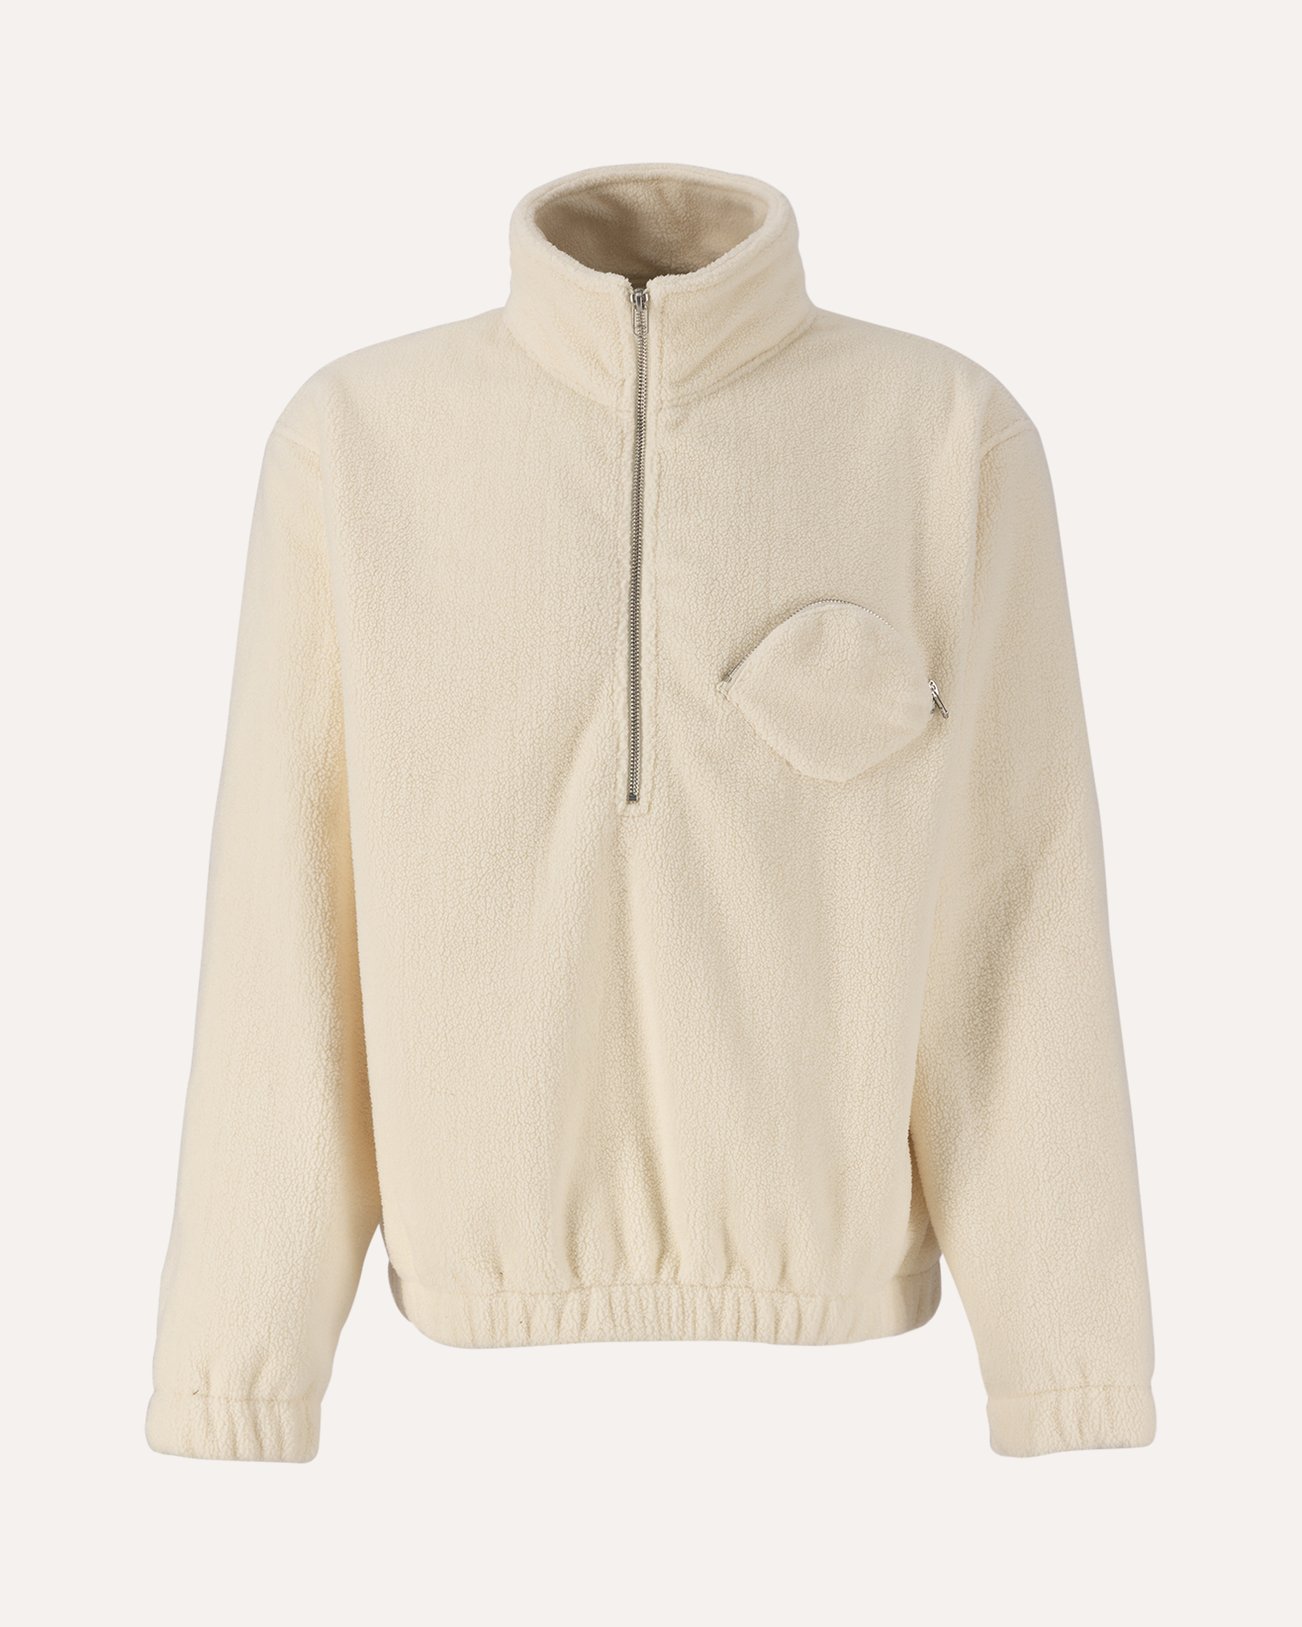 New Amsterdam Surf Association Oyster Fleece Off-White OFFWHITE 1